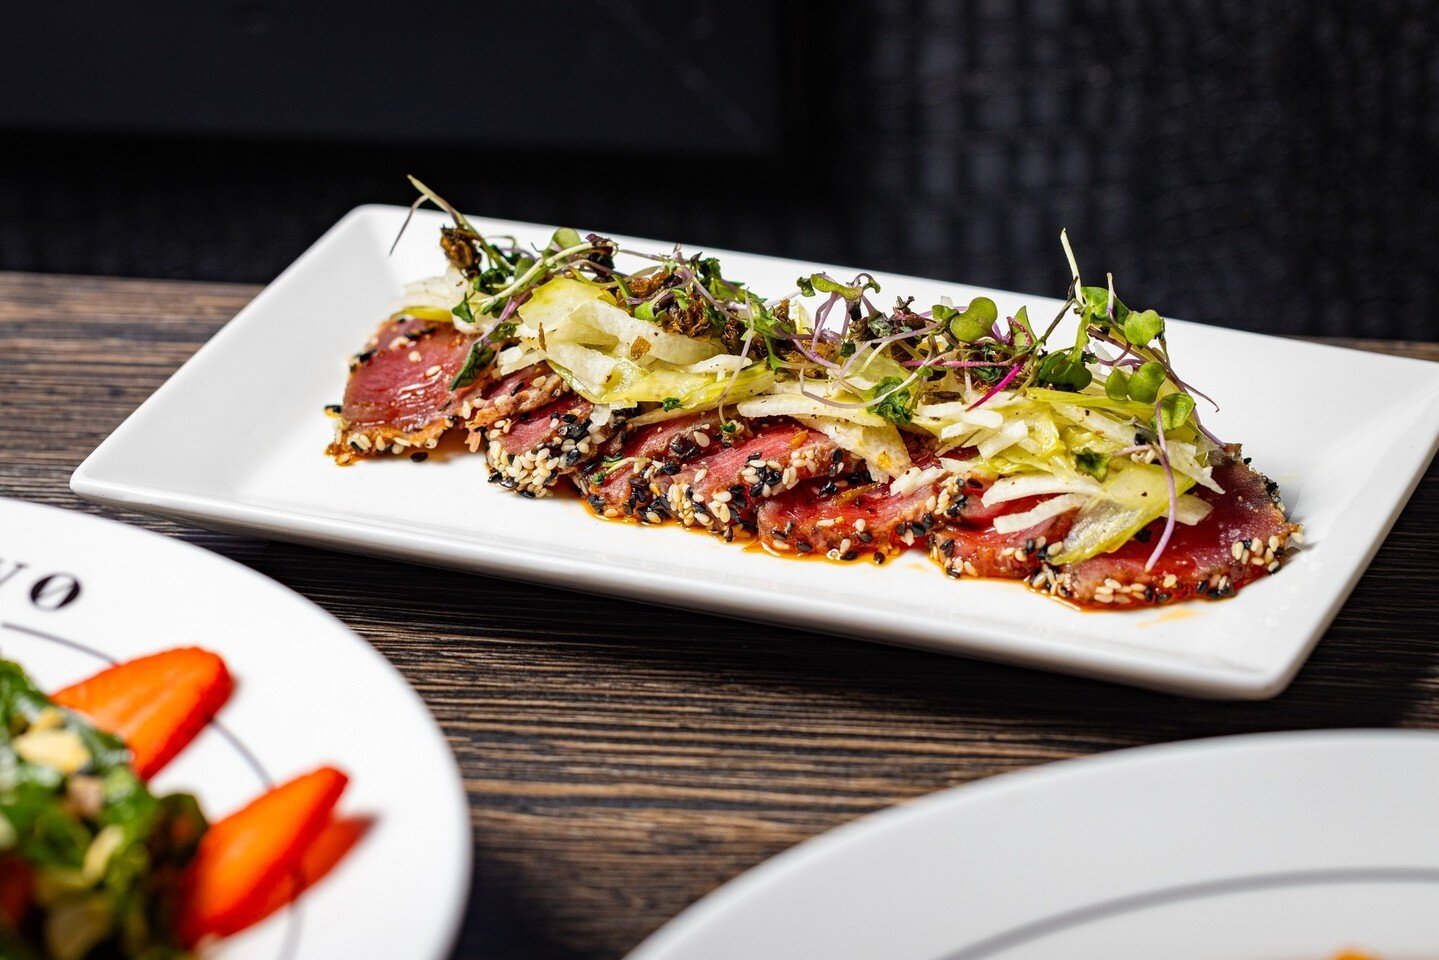 Crudo for days! 😍 𝗕𝗟𝗨𝗘𝗙𝗜𝗡 𝗧𝗨𝗡𝗔 𝗖𝗥𝗨𝗗𝗢 thinly sliced sesame-encrusted tuna, lightly seared, served with jicama slaw and chili oil⁠
⁠
It's Shabbat Friday! Stop by for lunch. Otherwise, we will see you for dinner tomorrow night!⁠
⁠
𝗨𝗣?